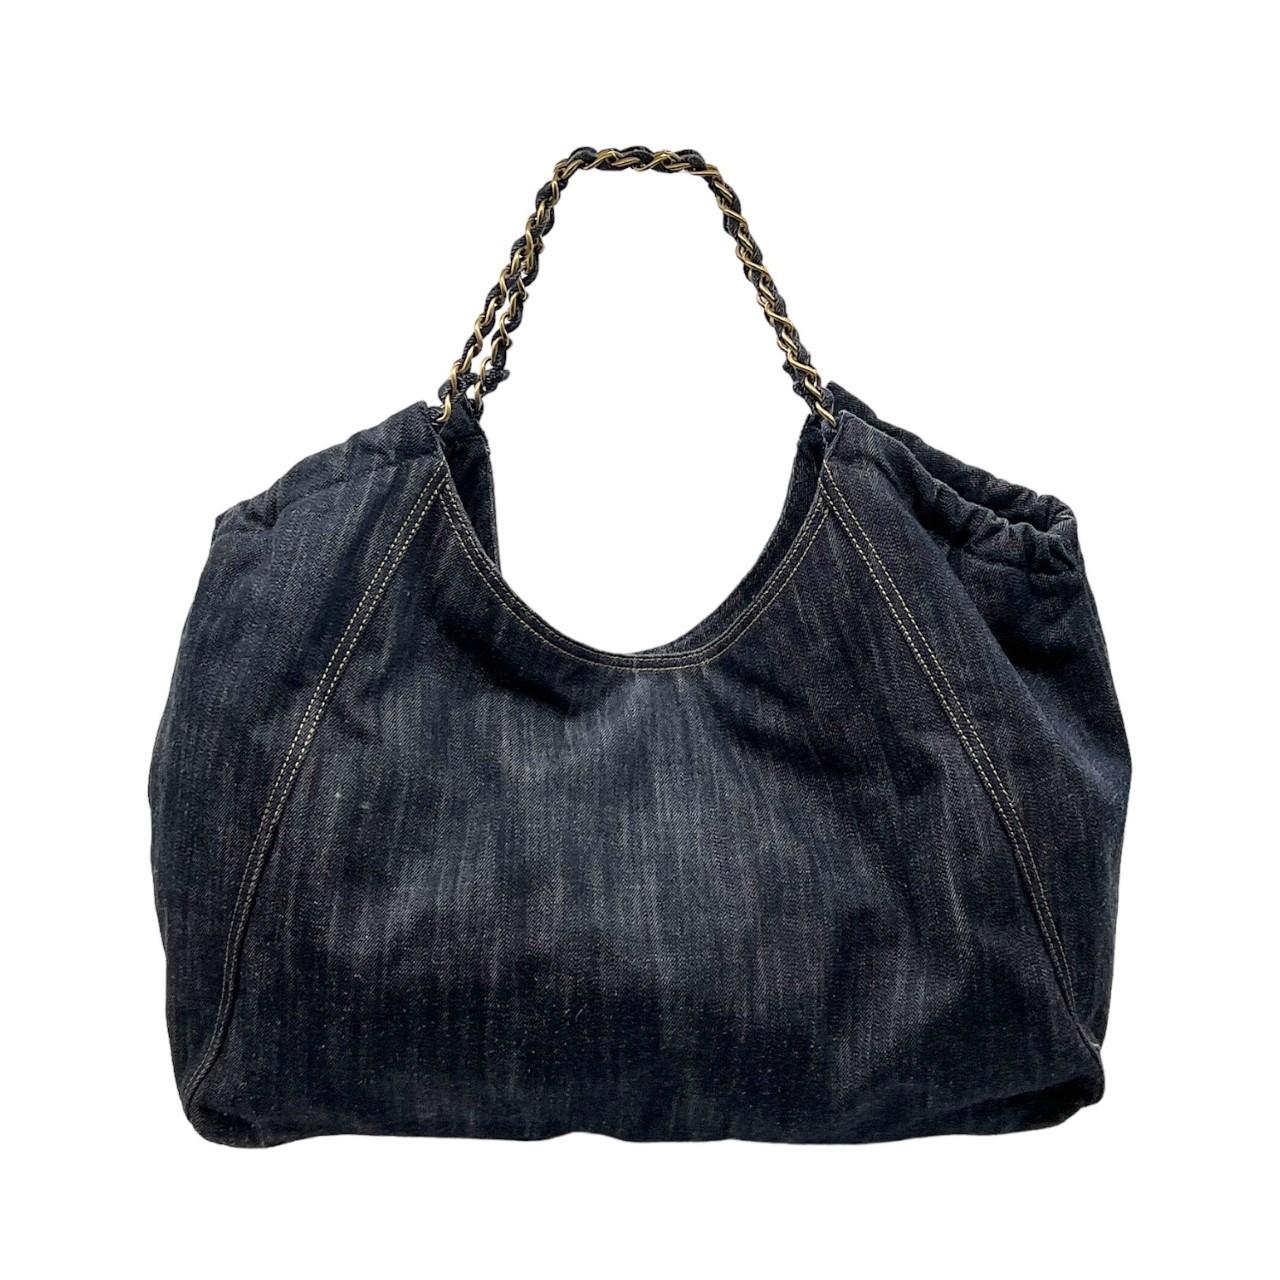 We are offering this lovely denim Chanel tote. Made in Italy, this bag is finely crafted of a denim exterior with a large embroidered Chanel interlocking 'CC' logo front and center. It has dual intertwined denim and gold-tone chain shoulder straps.